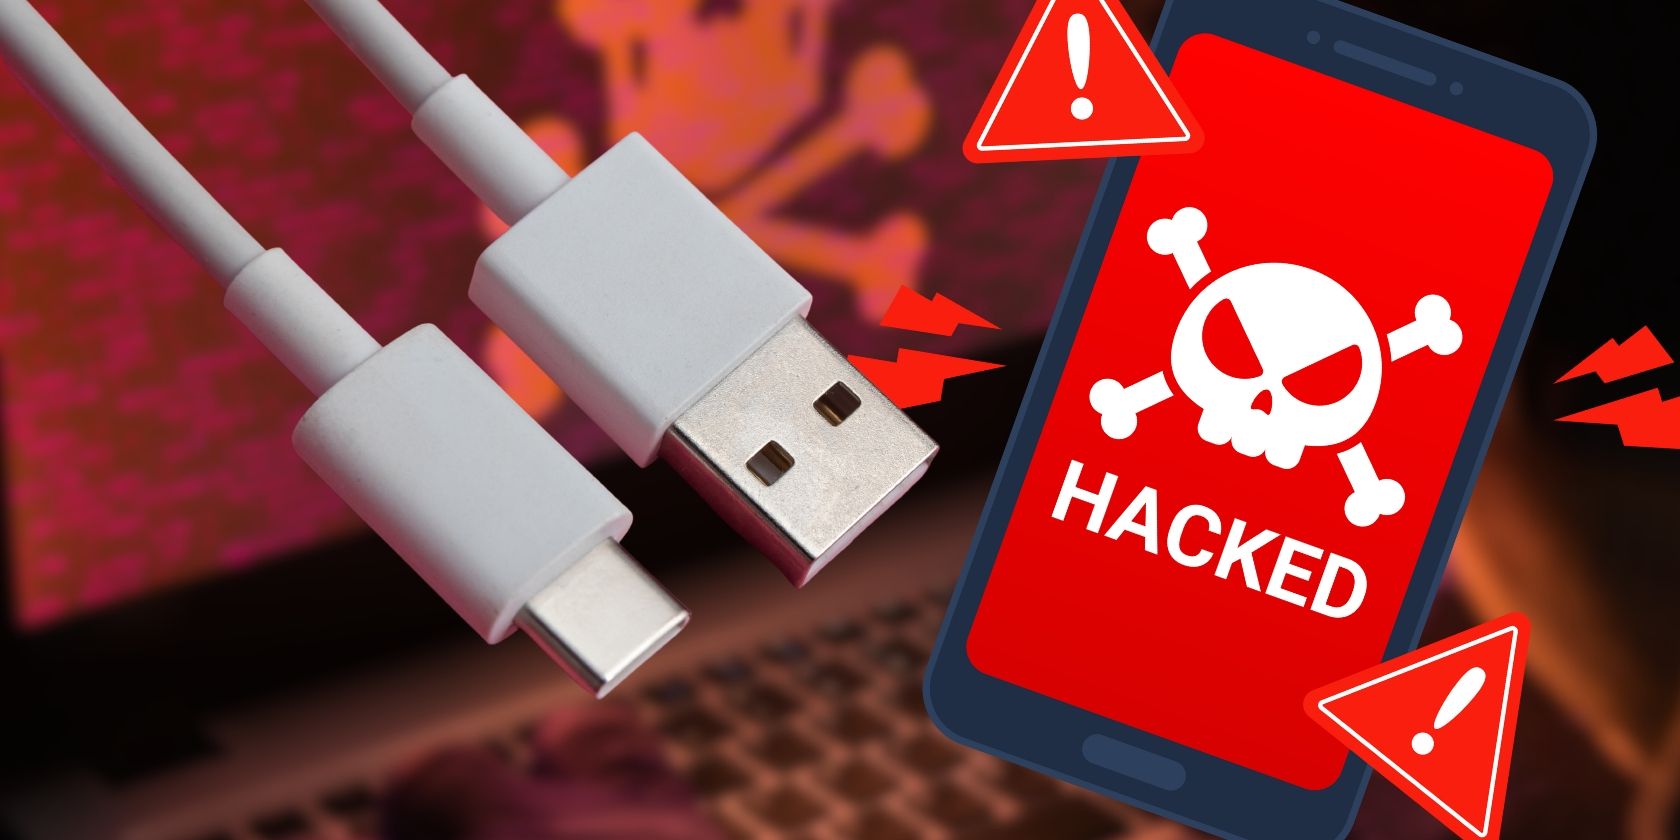 Fake USB hacking cable